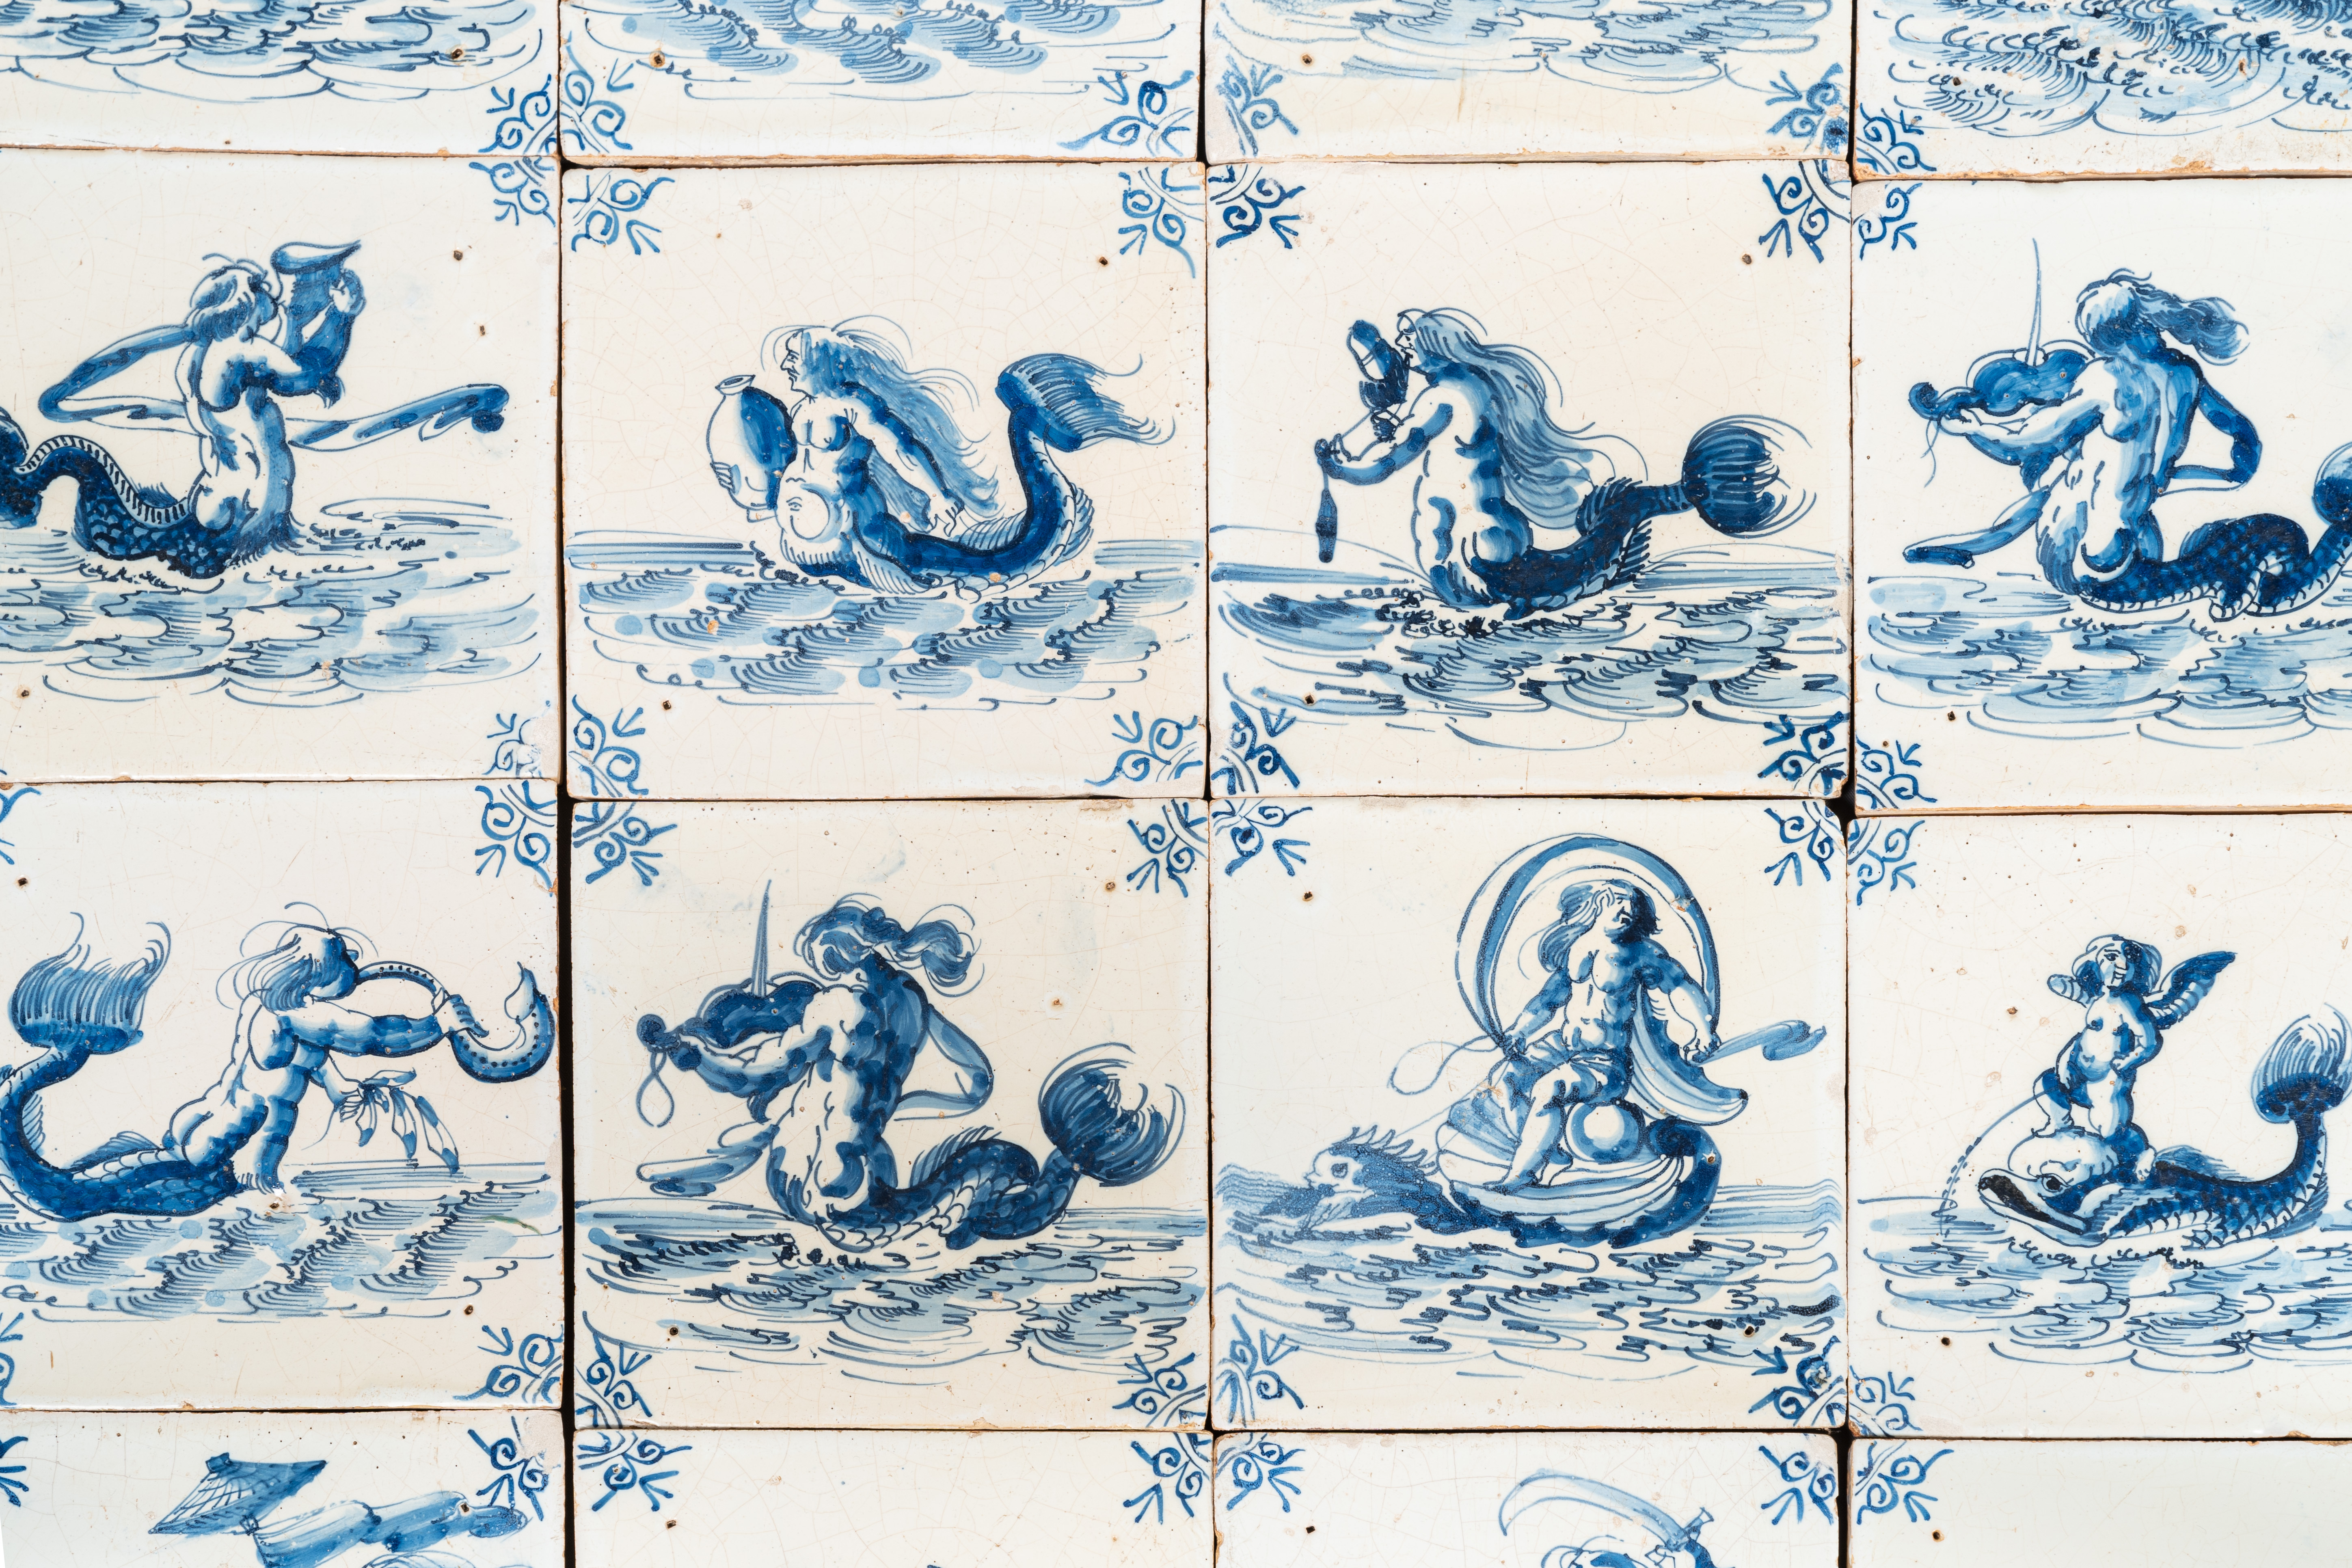 An exceptional set of 25 Dutch Delft blue and white tiles with fine sea monsters, Harlingen, Friesla - Image 4 of 4